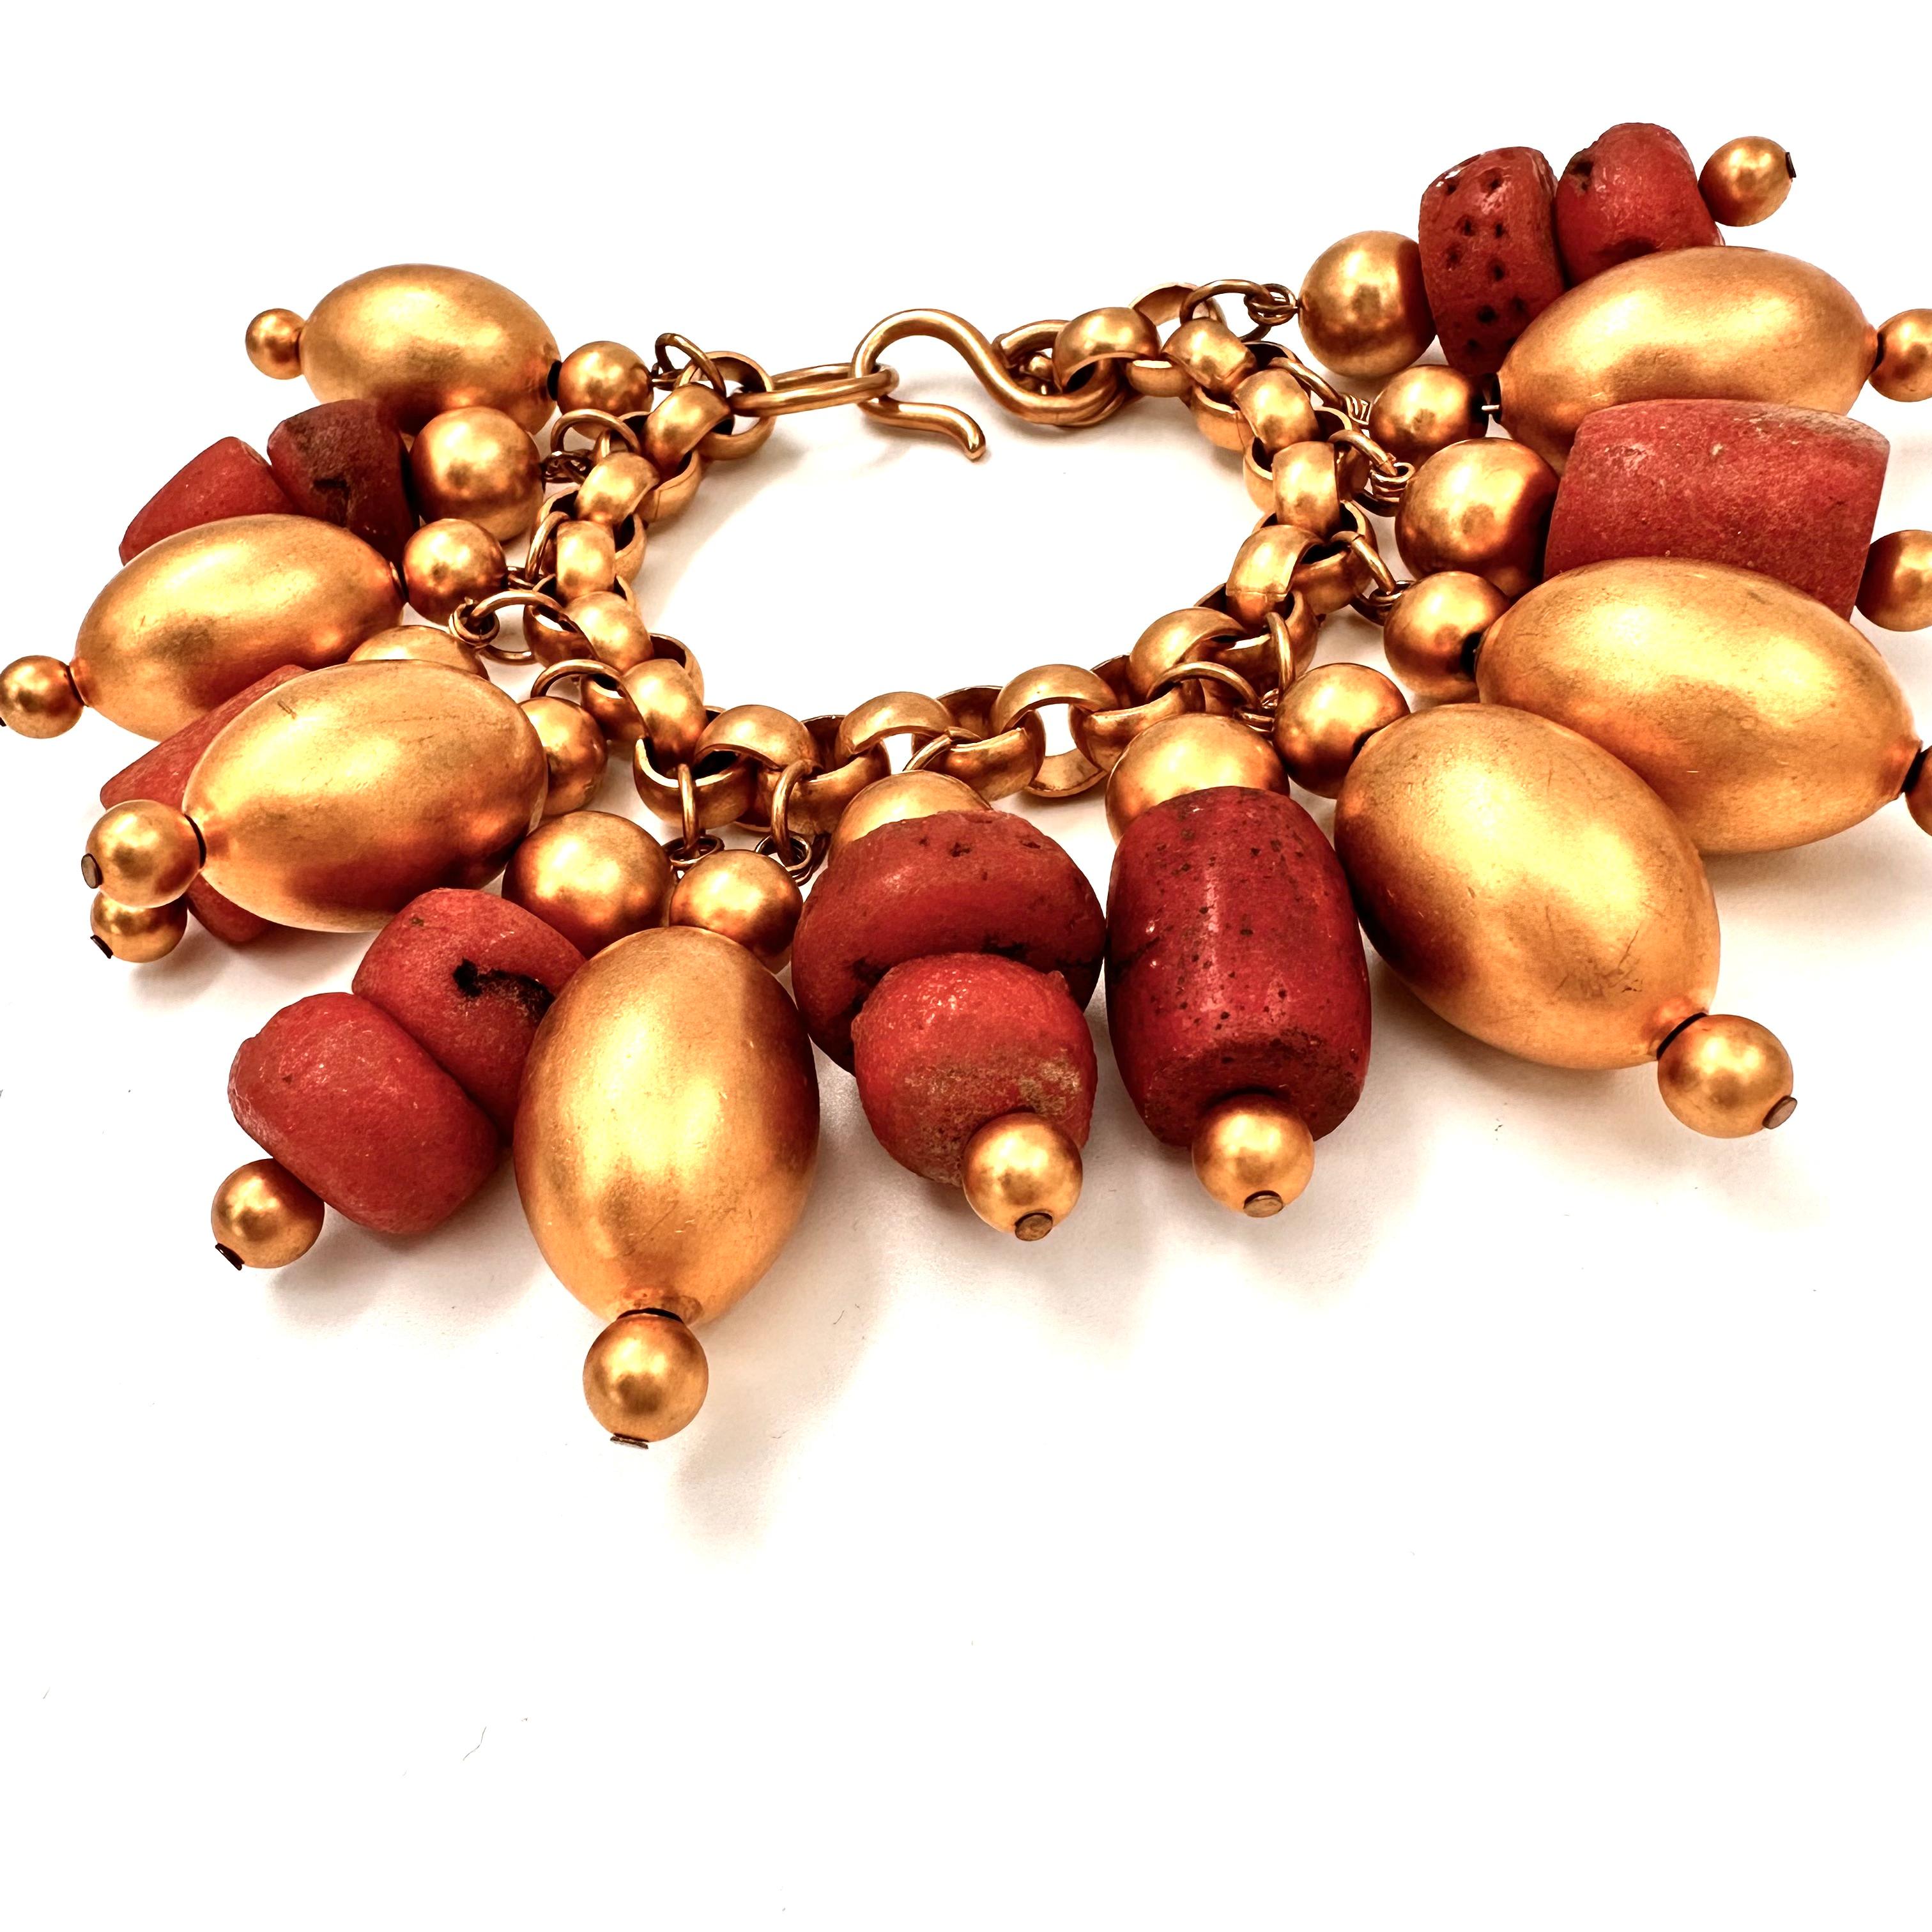 Robert Lee Morris Runway Collection Large Gold Charm Bracelet for Donna Karan, for a resort show in 1987. The oversized Gold plated beads are interspersed with chunks of rounded red African glass beads. Each glass bead is one of a kind and